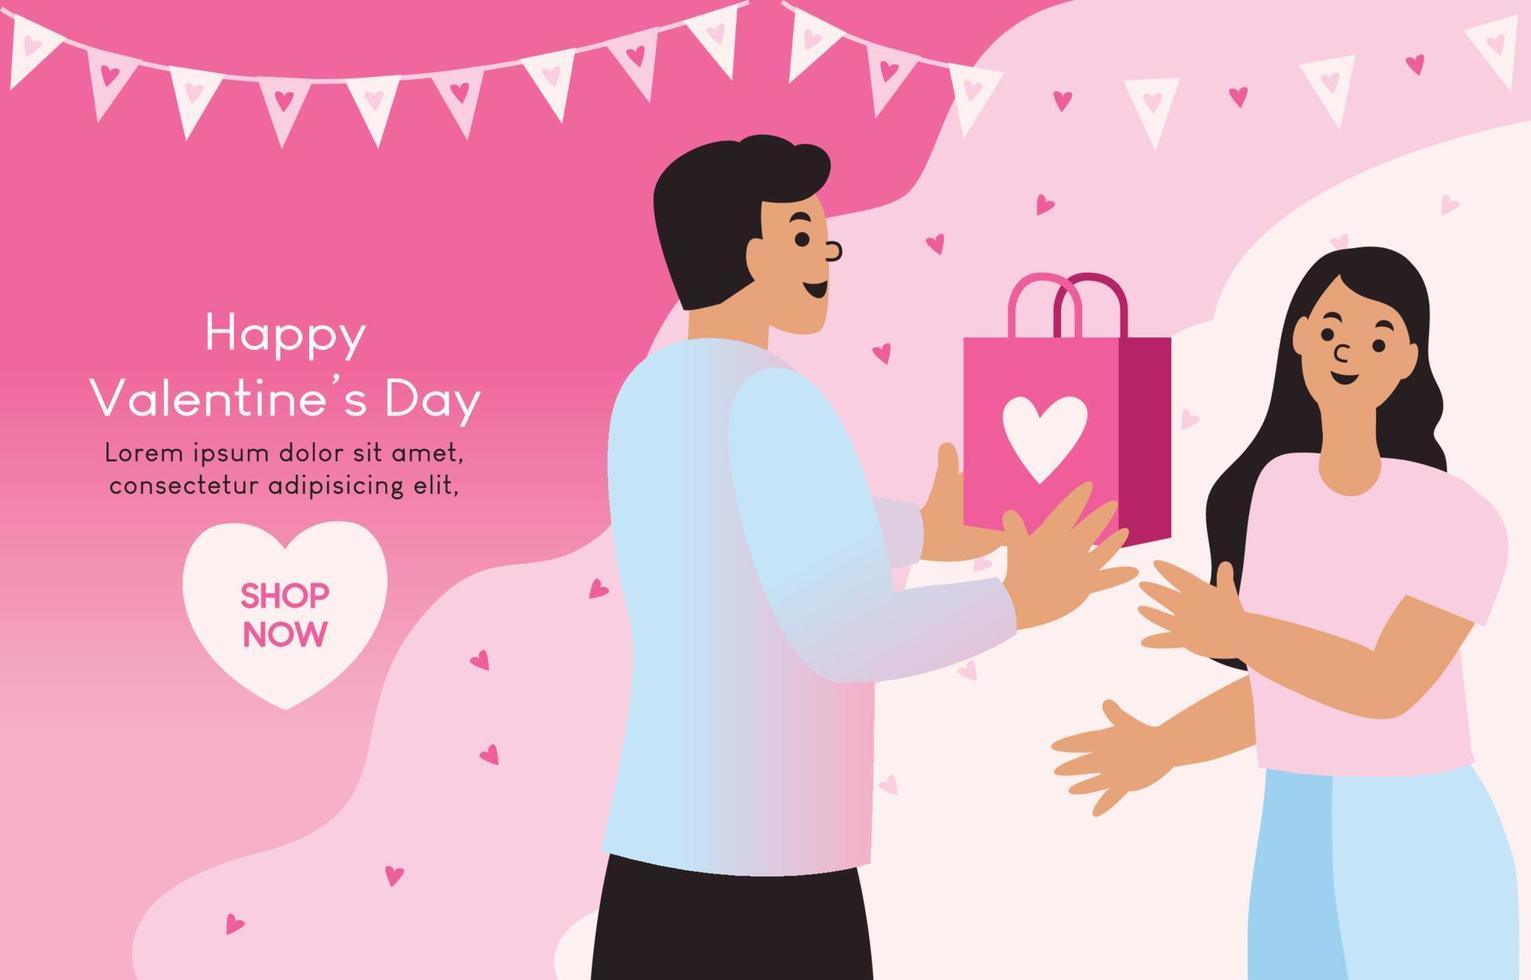 Couples give gifts to each other Buying a gift for lover in valentine's day. Men carry shopping bags to women. women glad to receive a gift from a lover.vector illustration design for banner, website vector